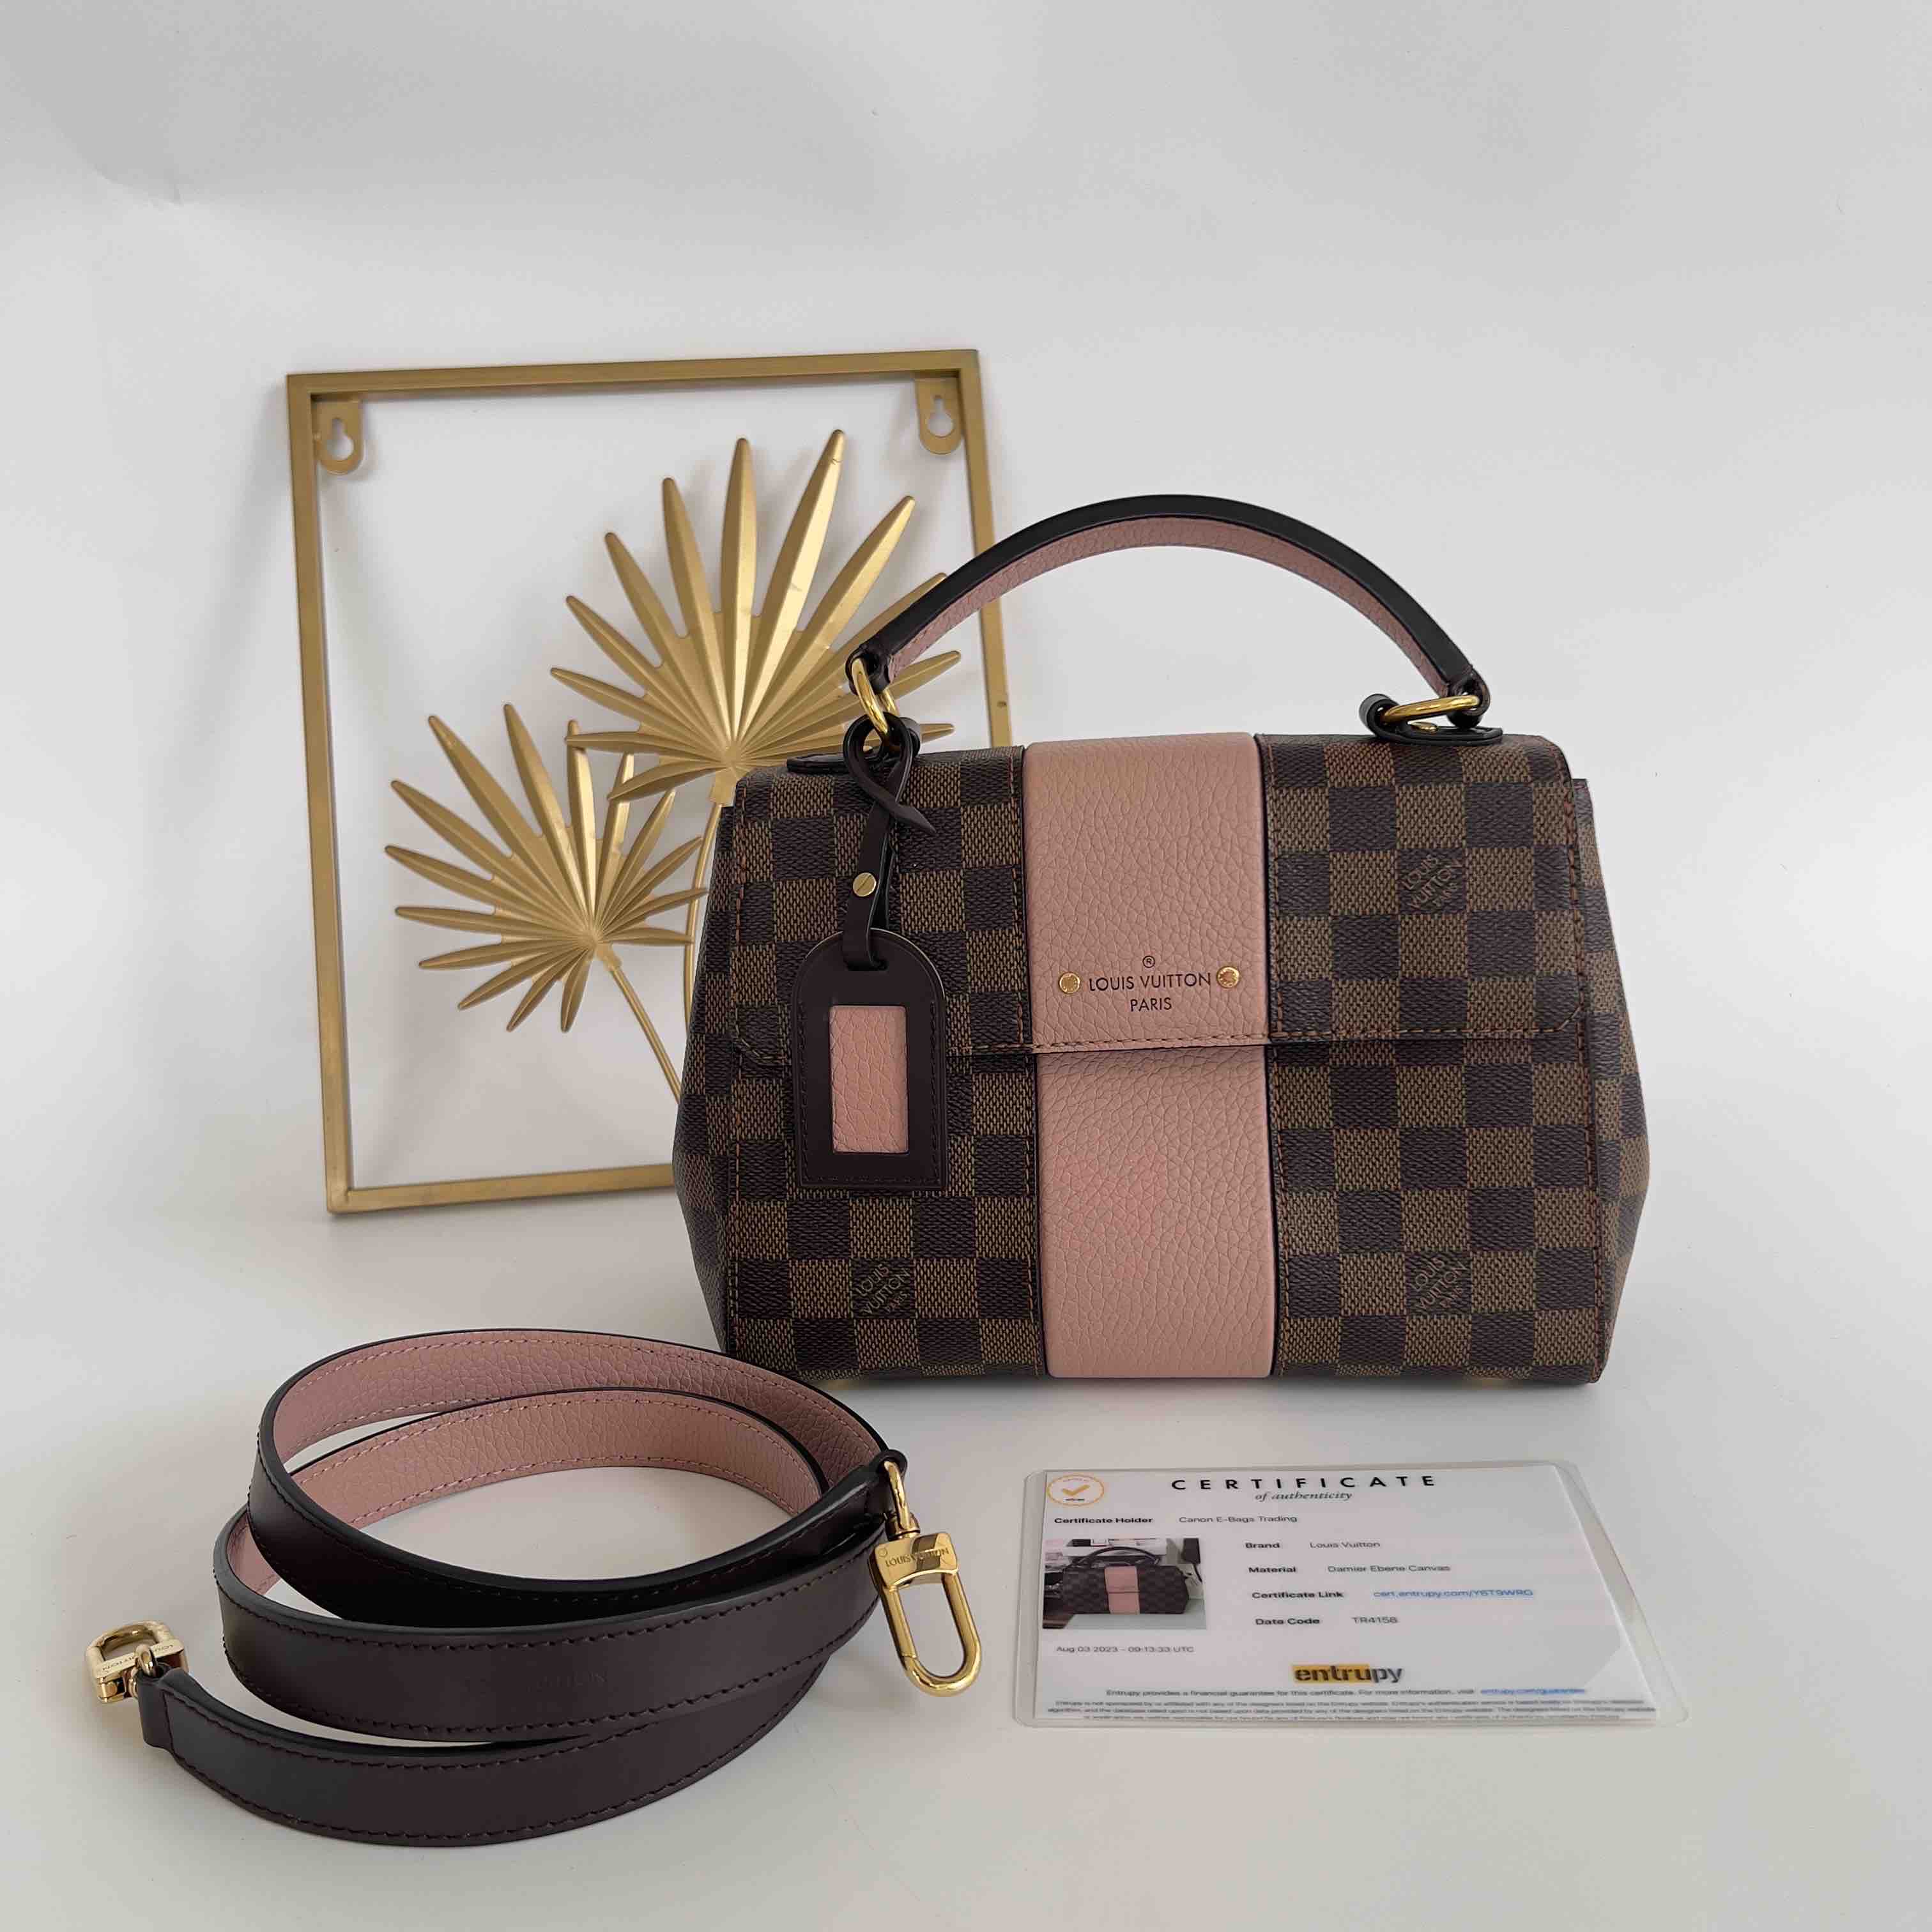 SOLD/LAYAWAY💕 Louis Vuitton Damier Ebene Bondstreet BB Pink Trims. DC:  TR4158. With long strap & certificate of authenticity from ENTRUPY ❤️ -  Canon E-Bags Prime